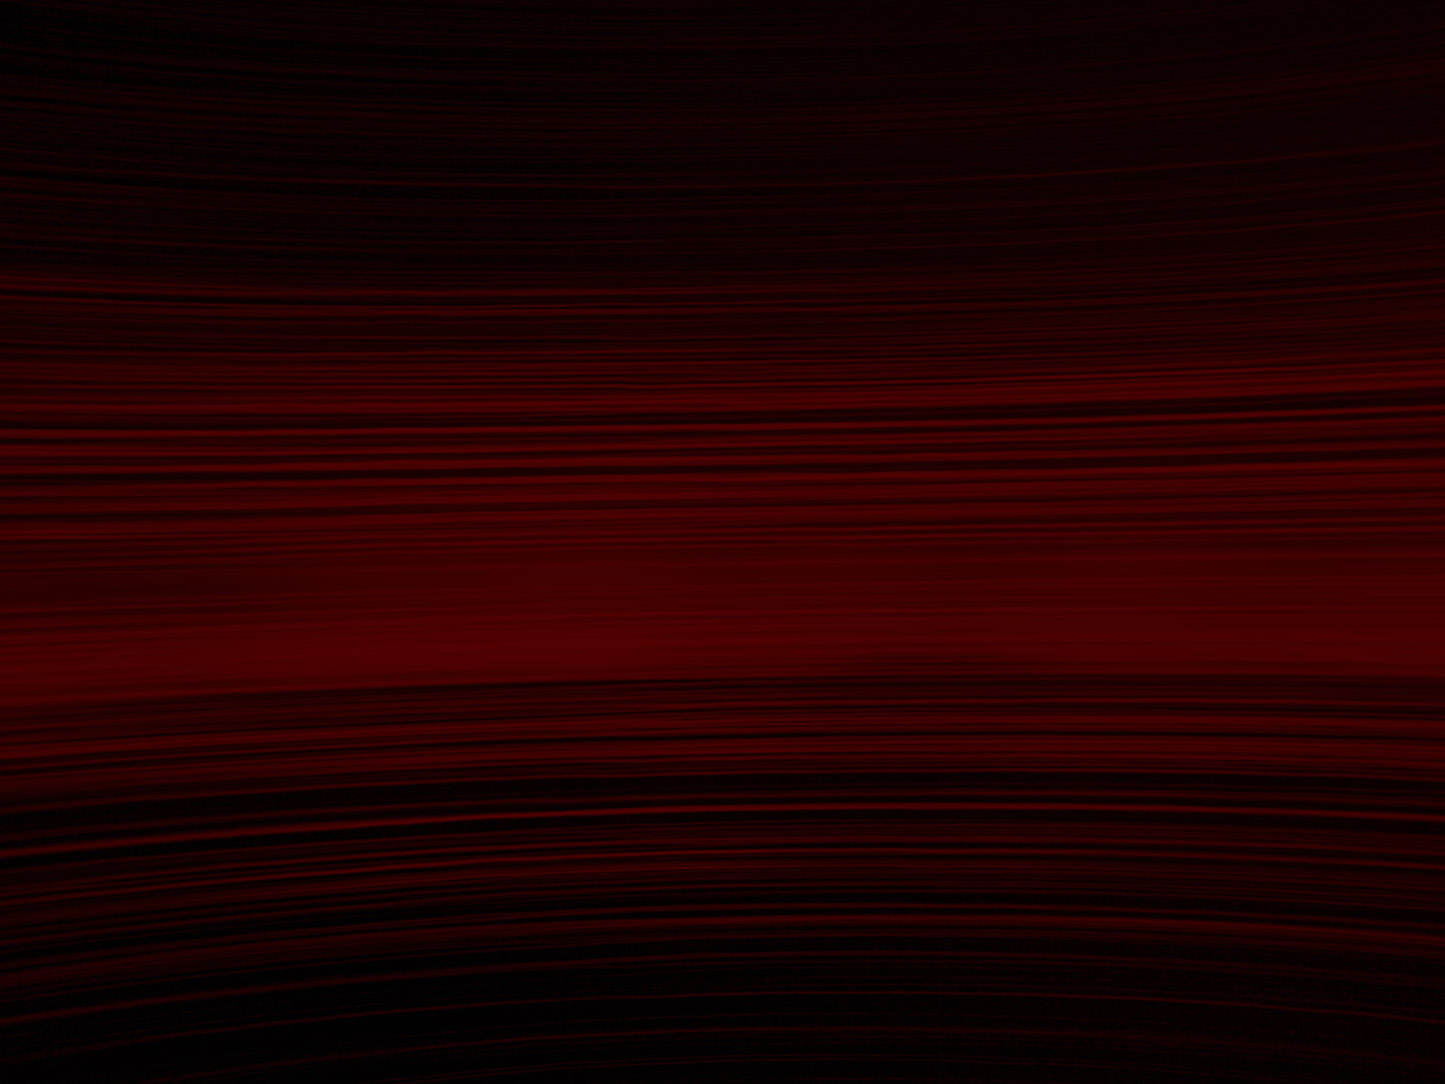 Red and black gradient background